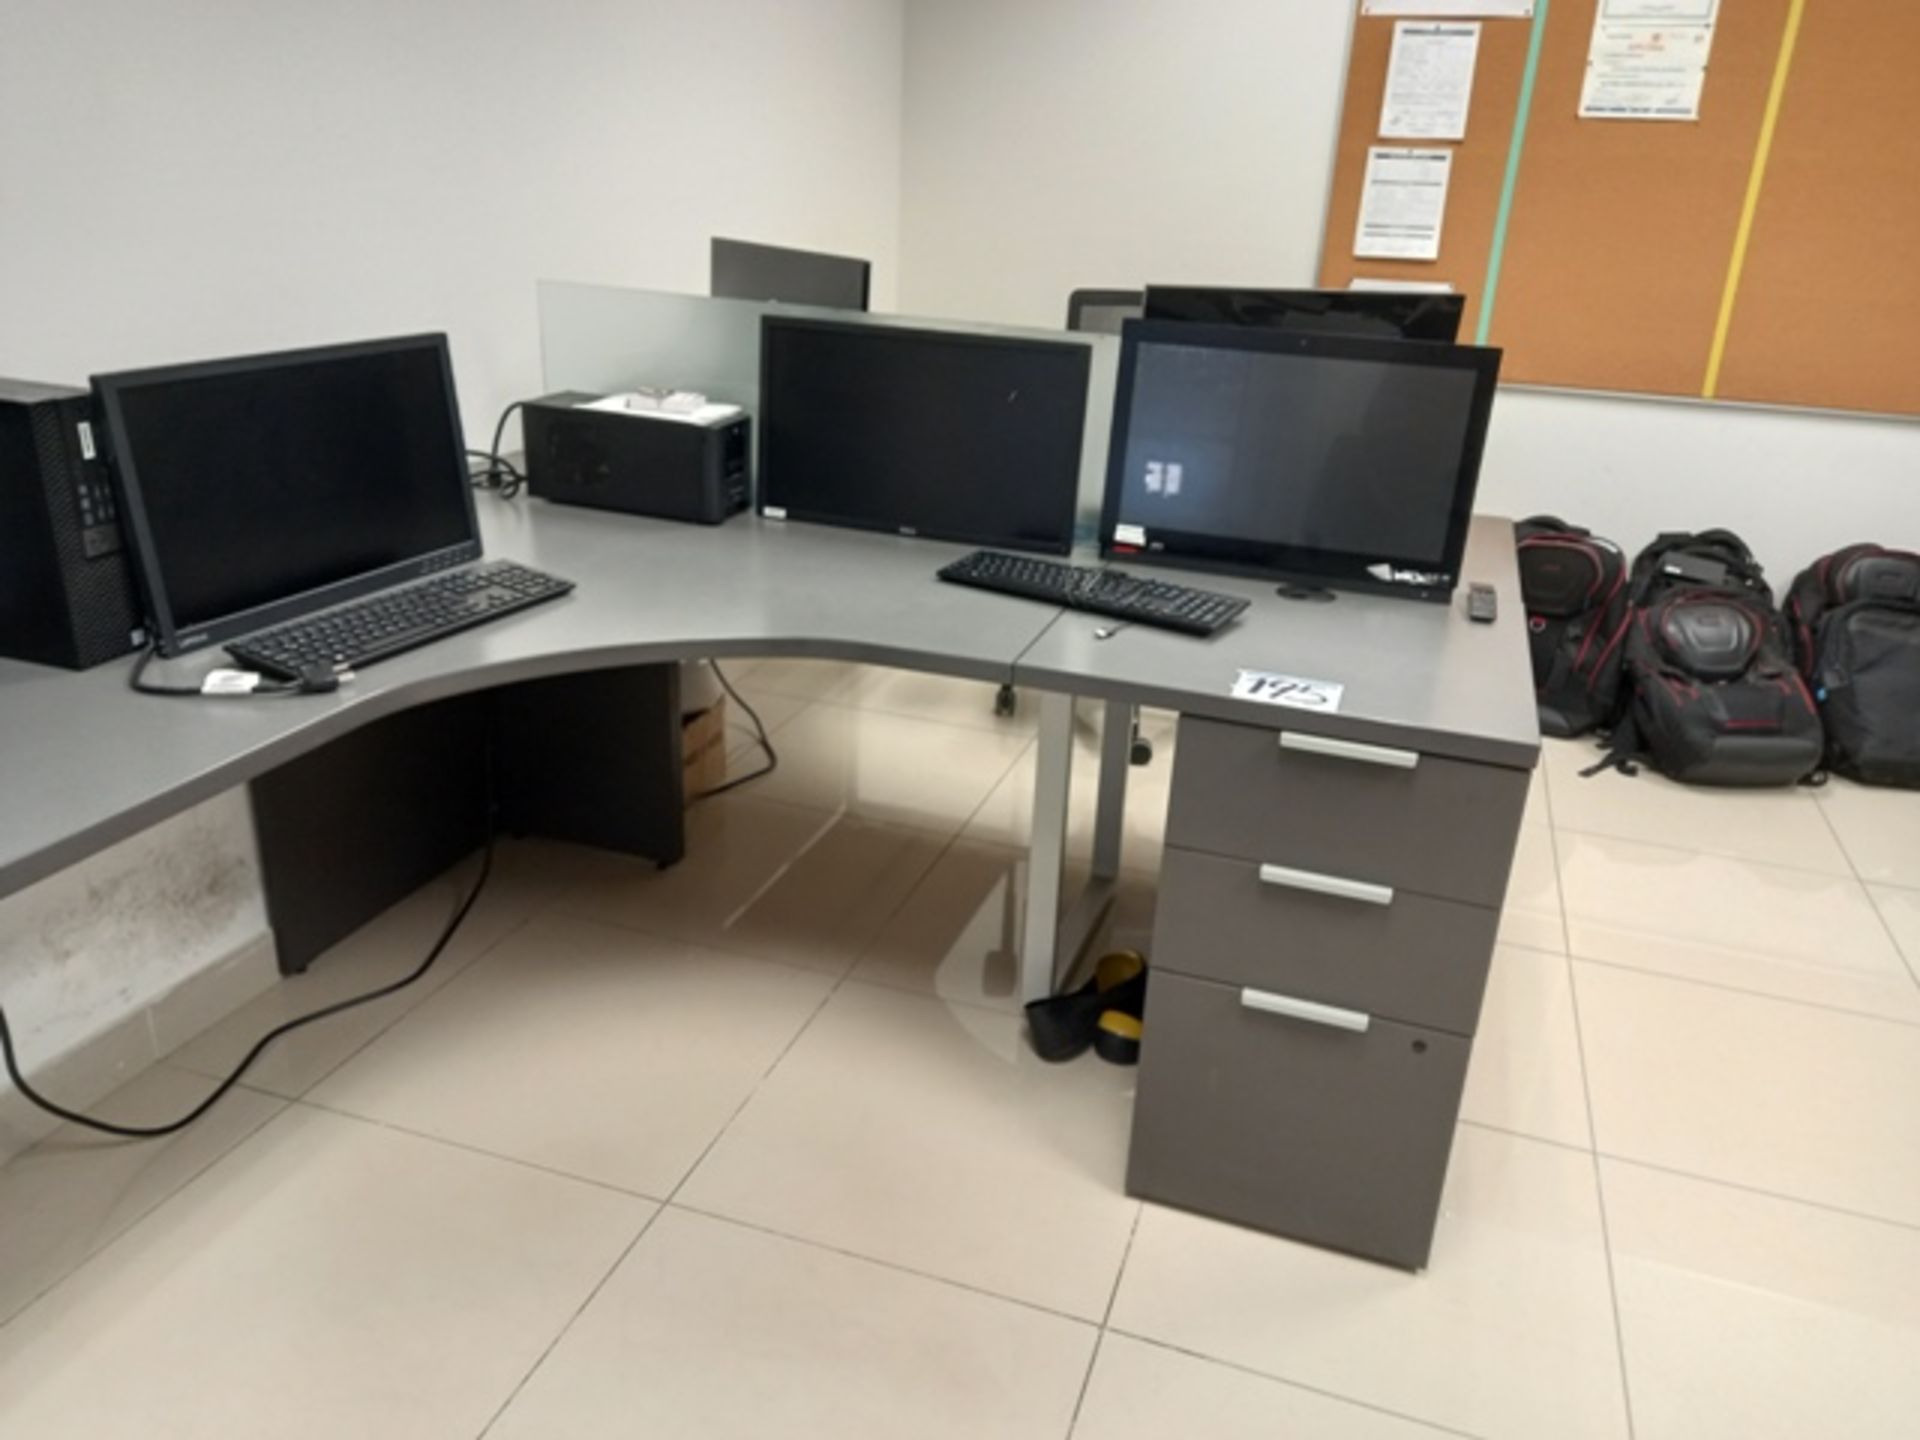 (29) Pcs Office Furniture and Computer Equipment Consisting of: (2) 2 Person Work Stations and more - Image 13 of 33